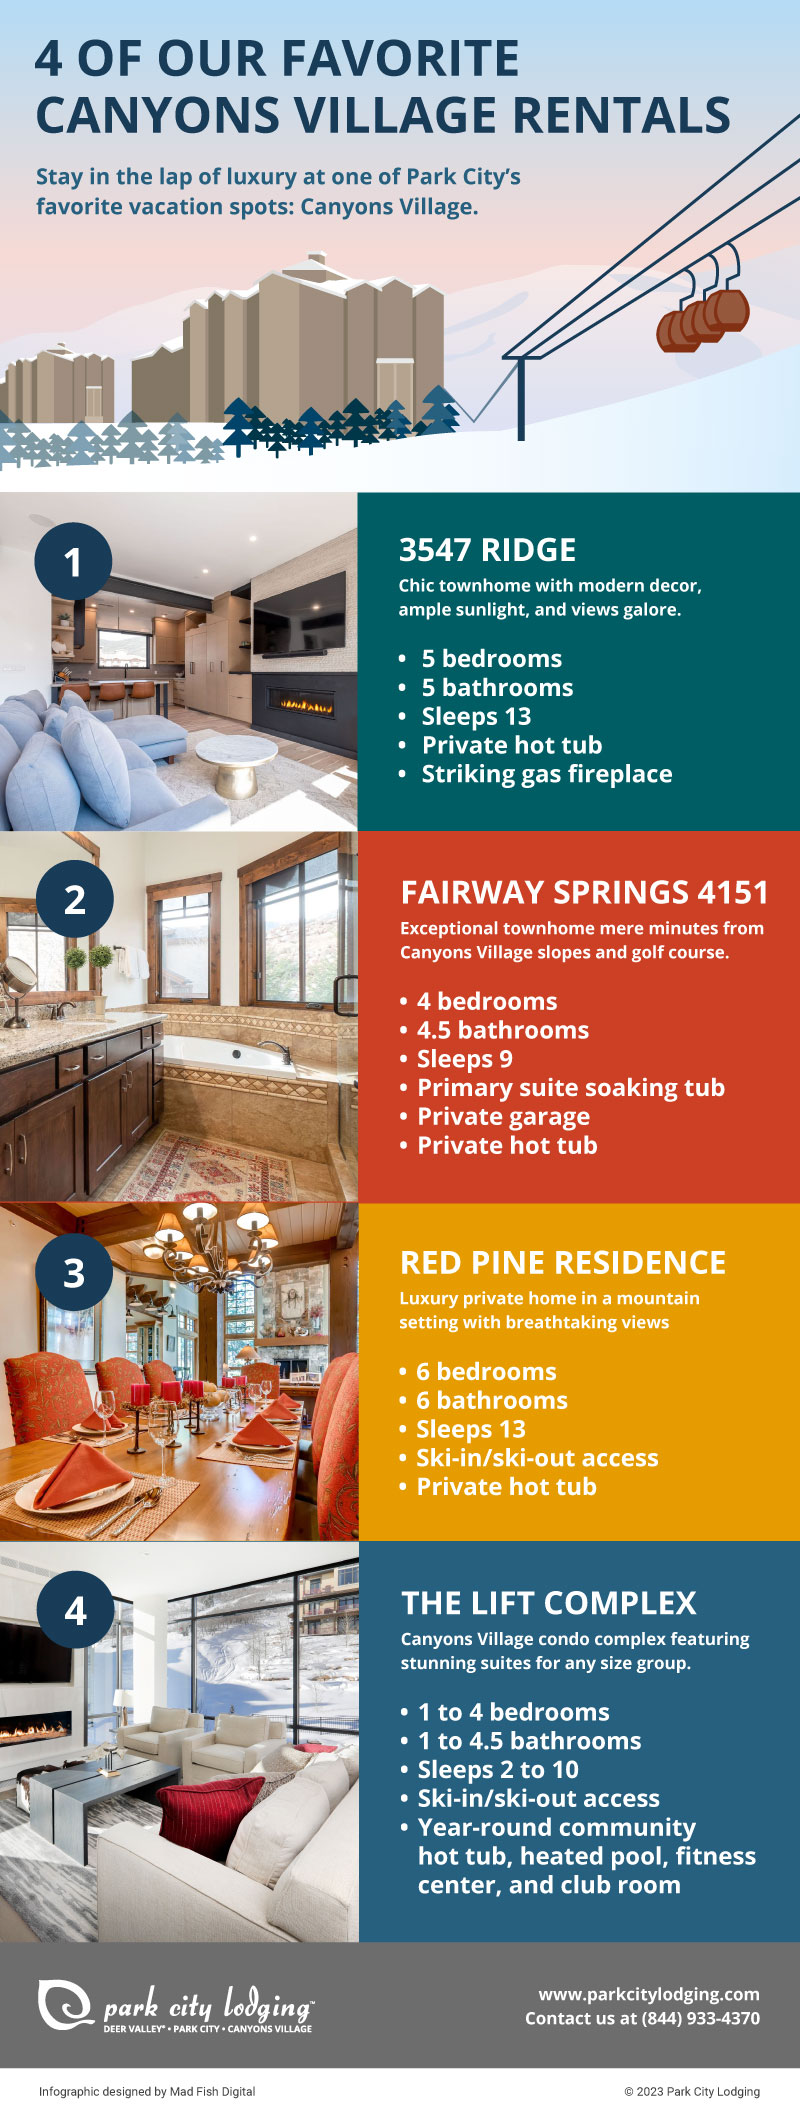 An infographic on the 4 Canyons Village rentals.